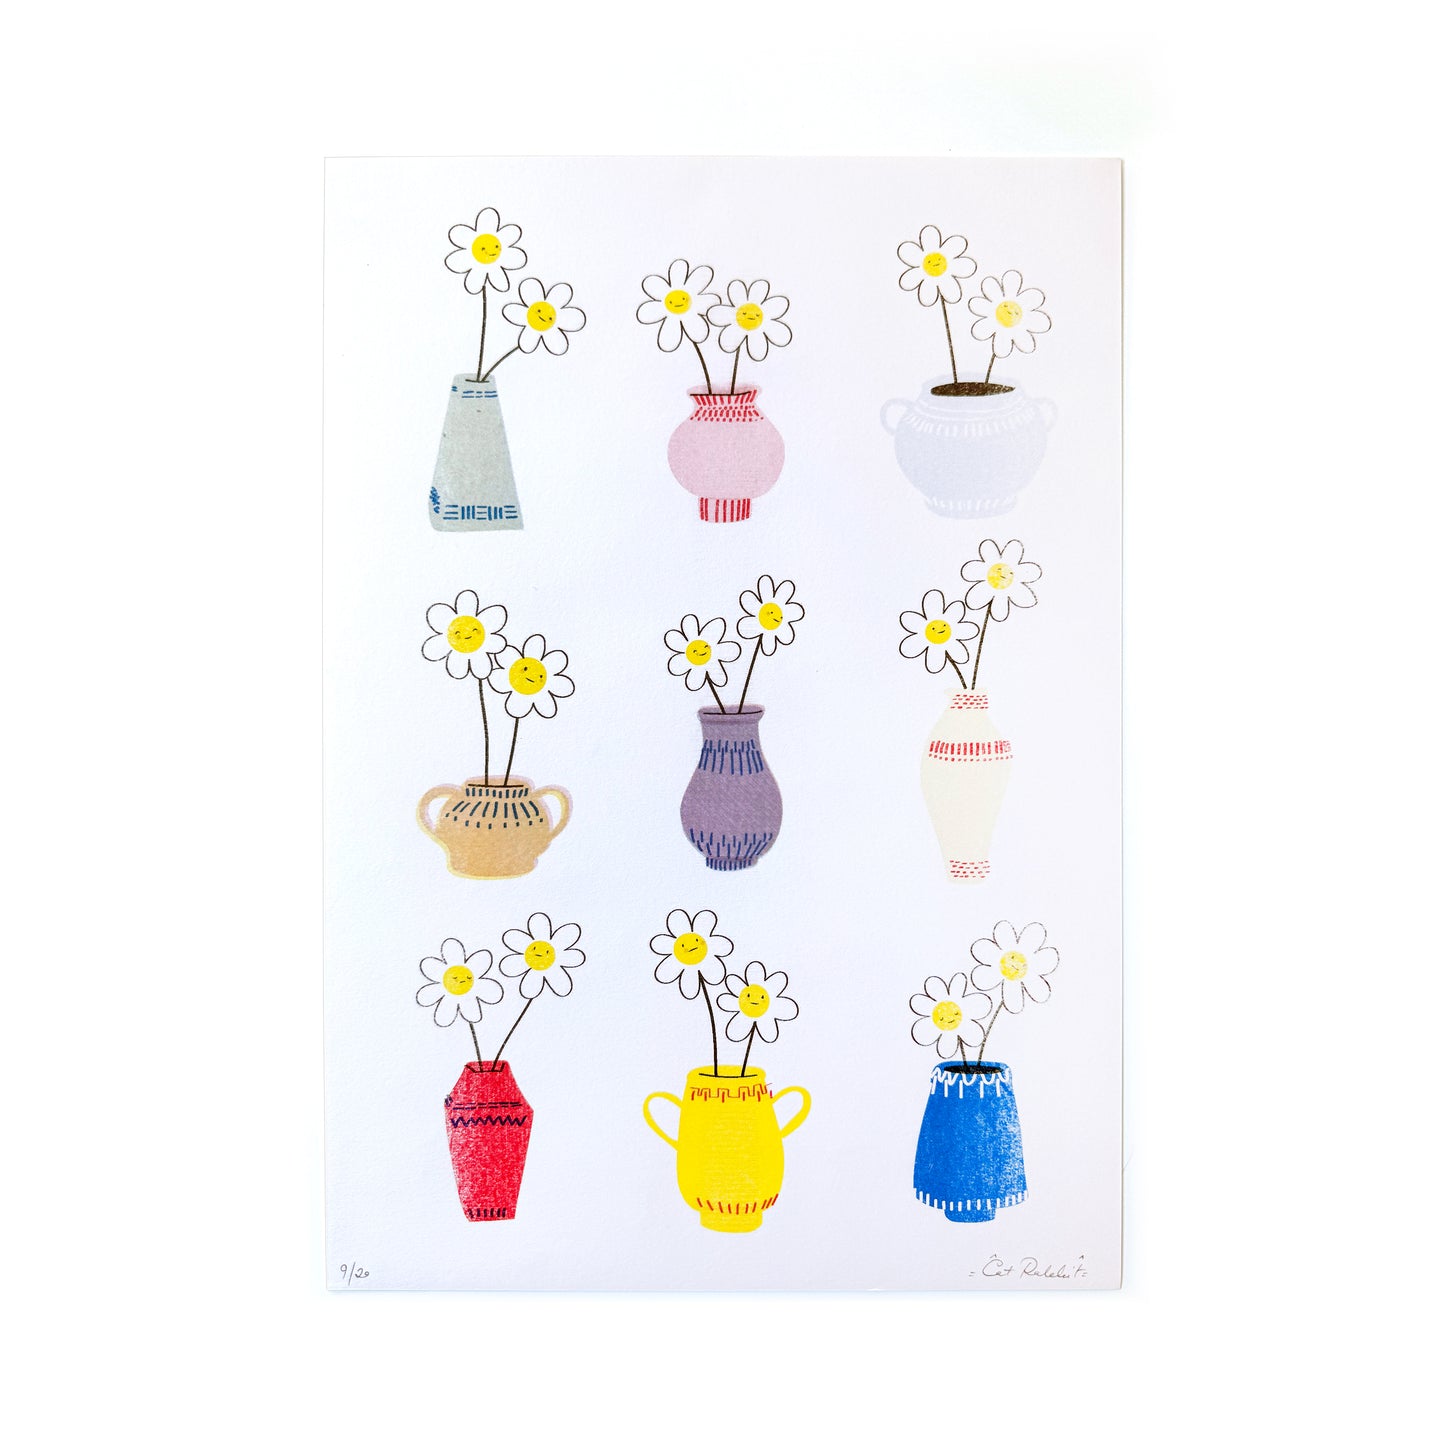 Cat Rabbit - Daisies in Vases Limited Ed. Risograph